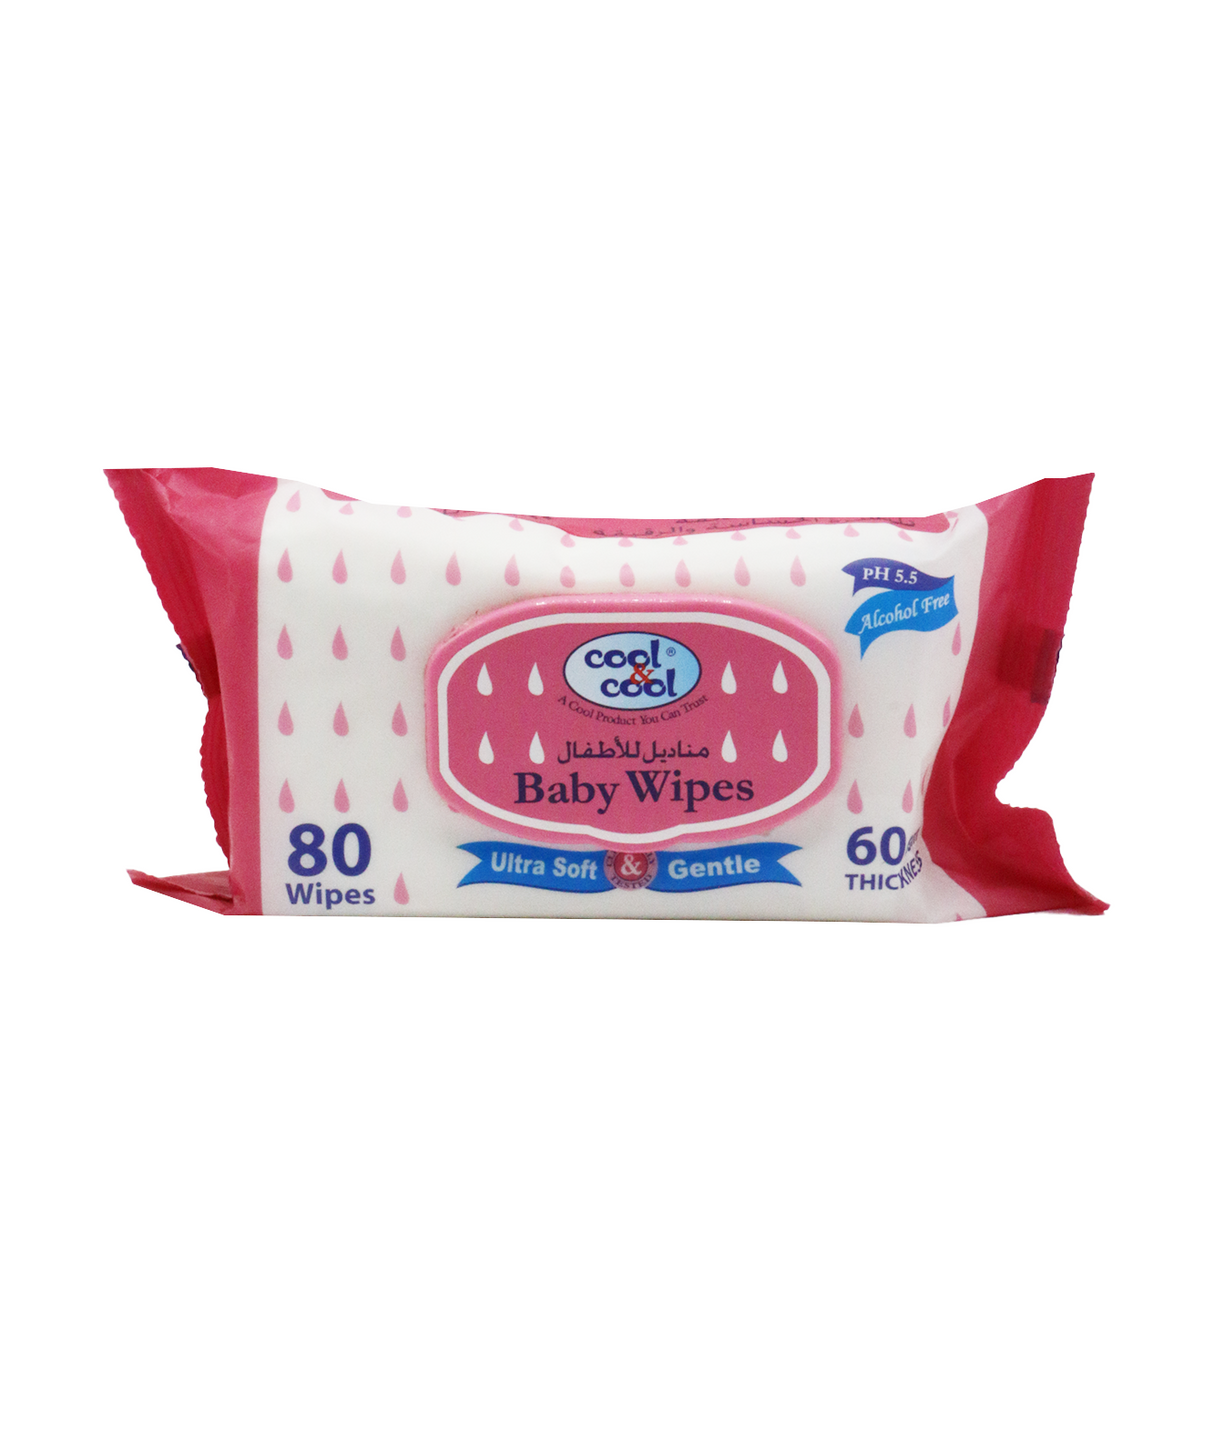 cool&cool baby wipes 80pc b1236c